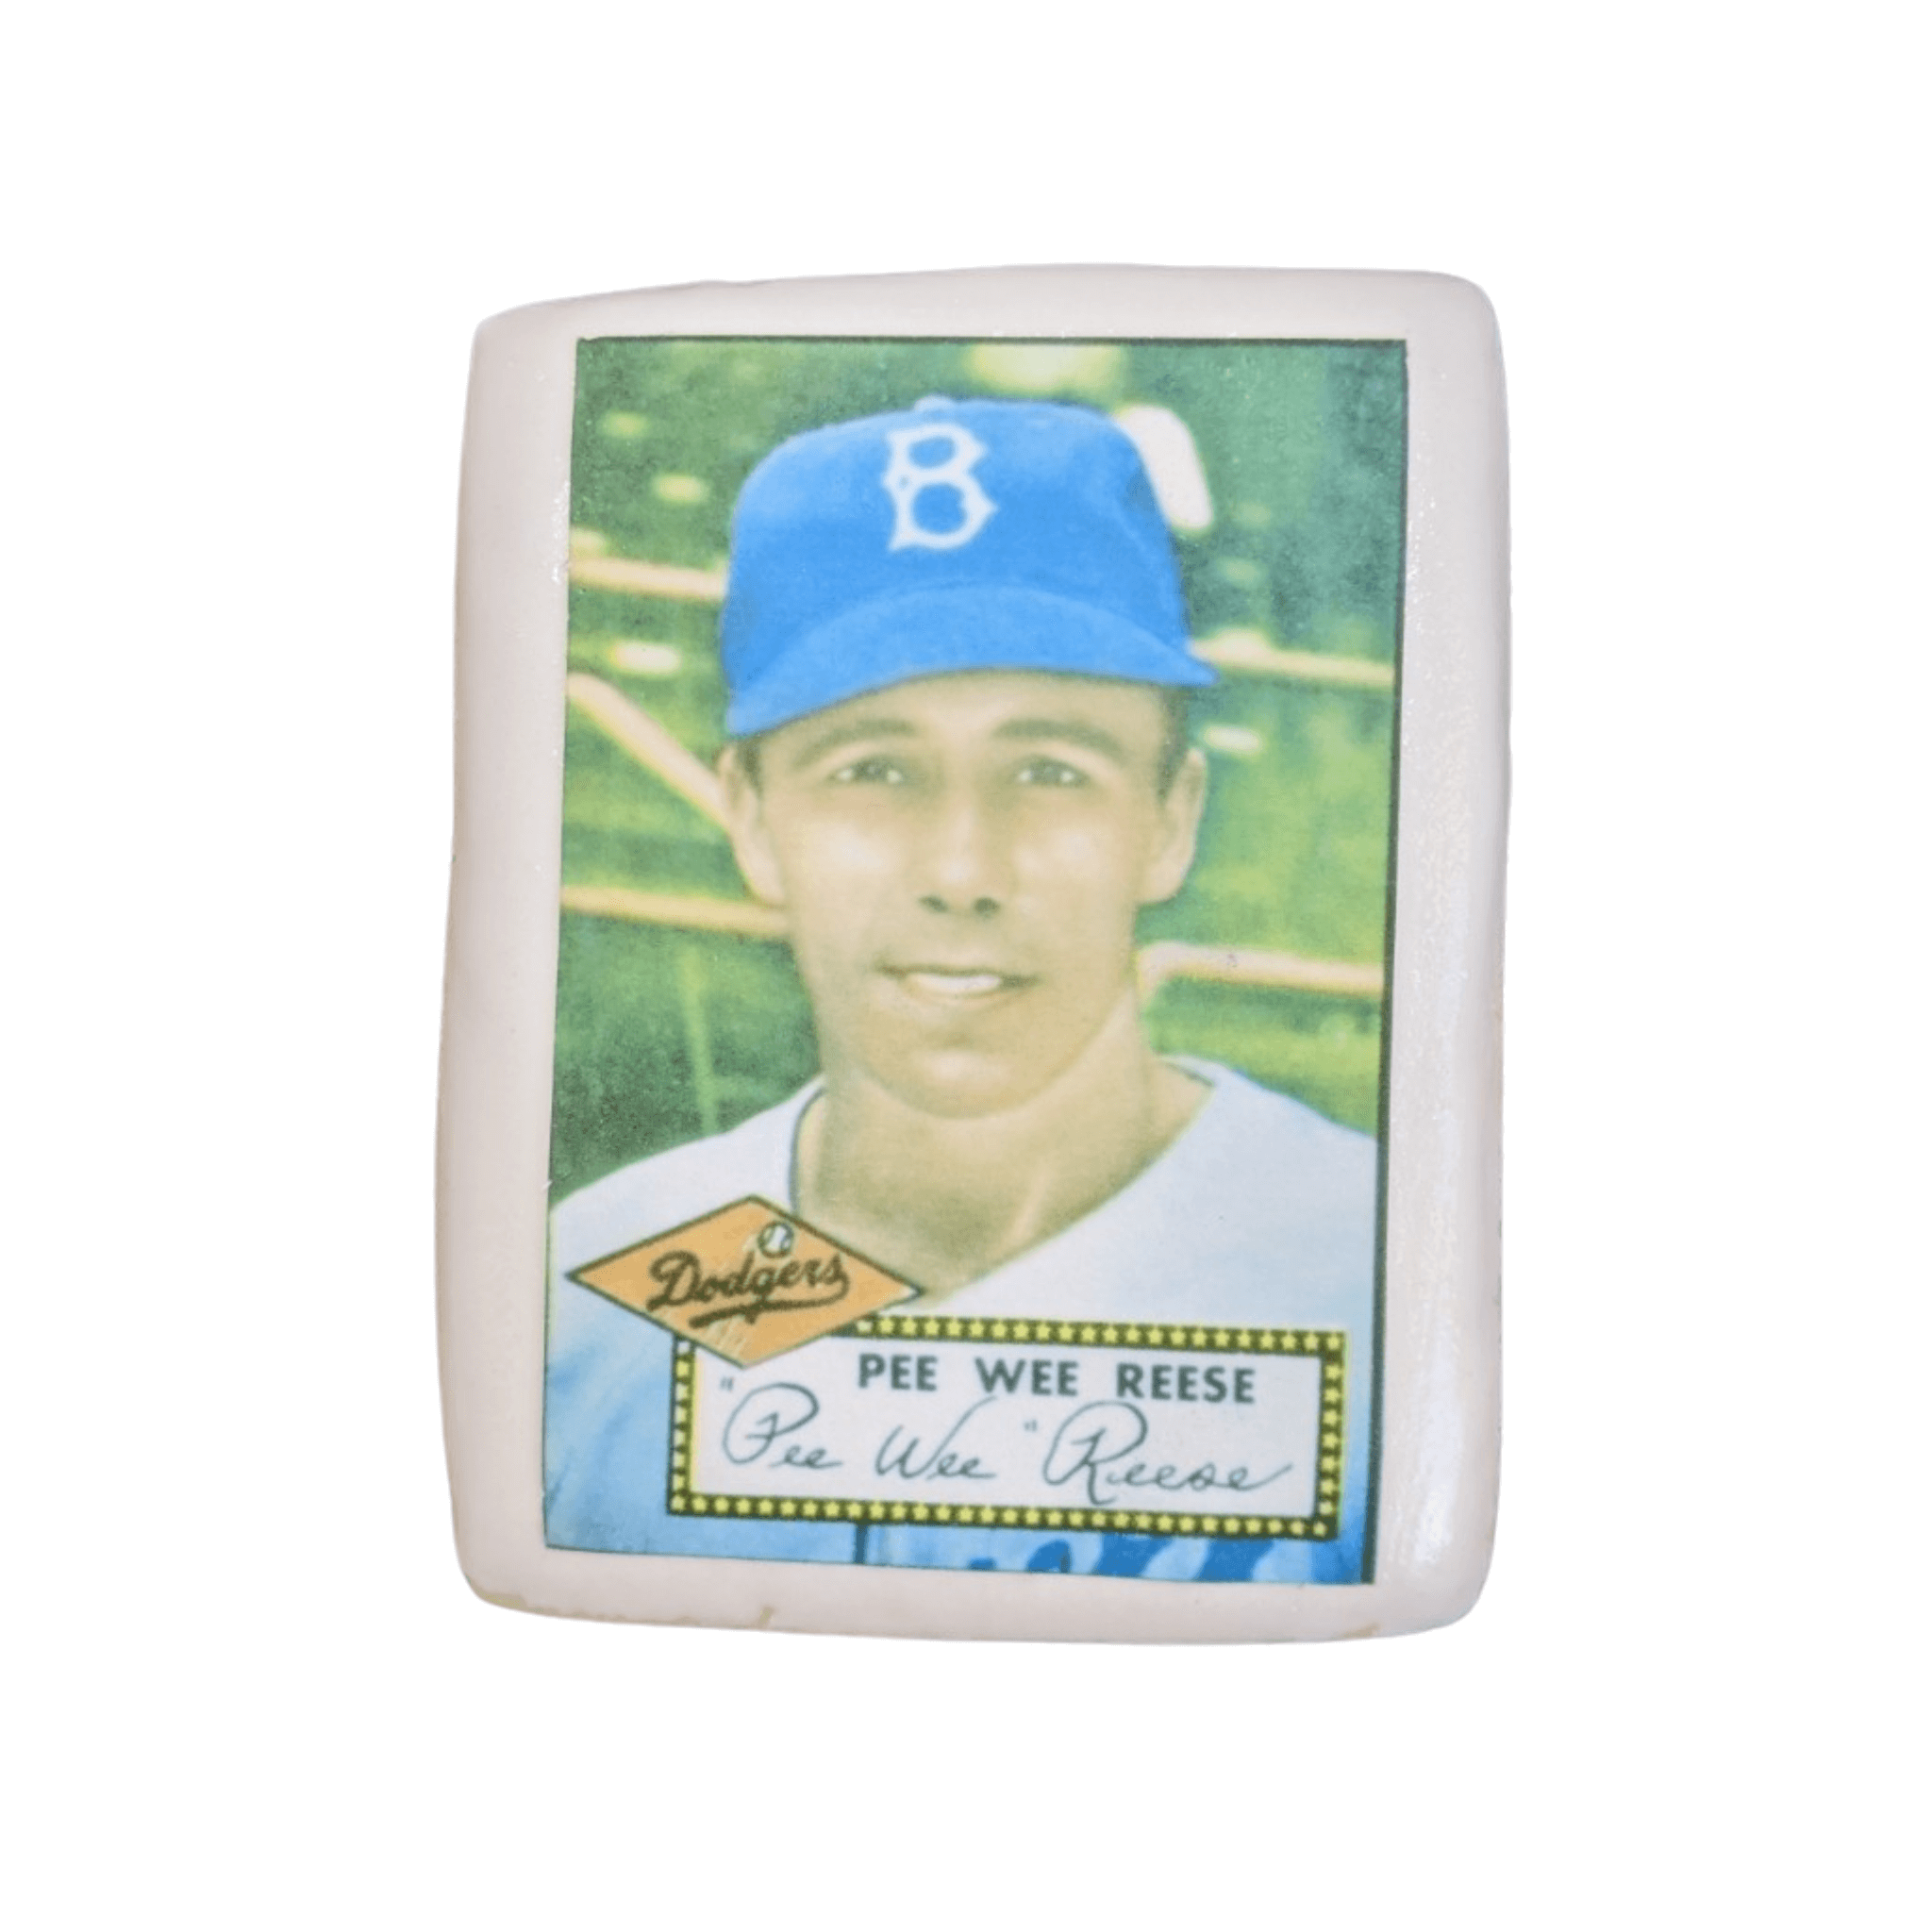 Pee Wee Reese baseball card cookie for LA Dodgers